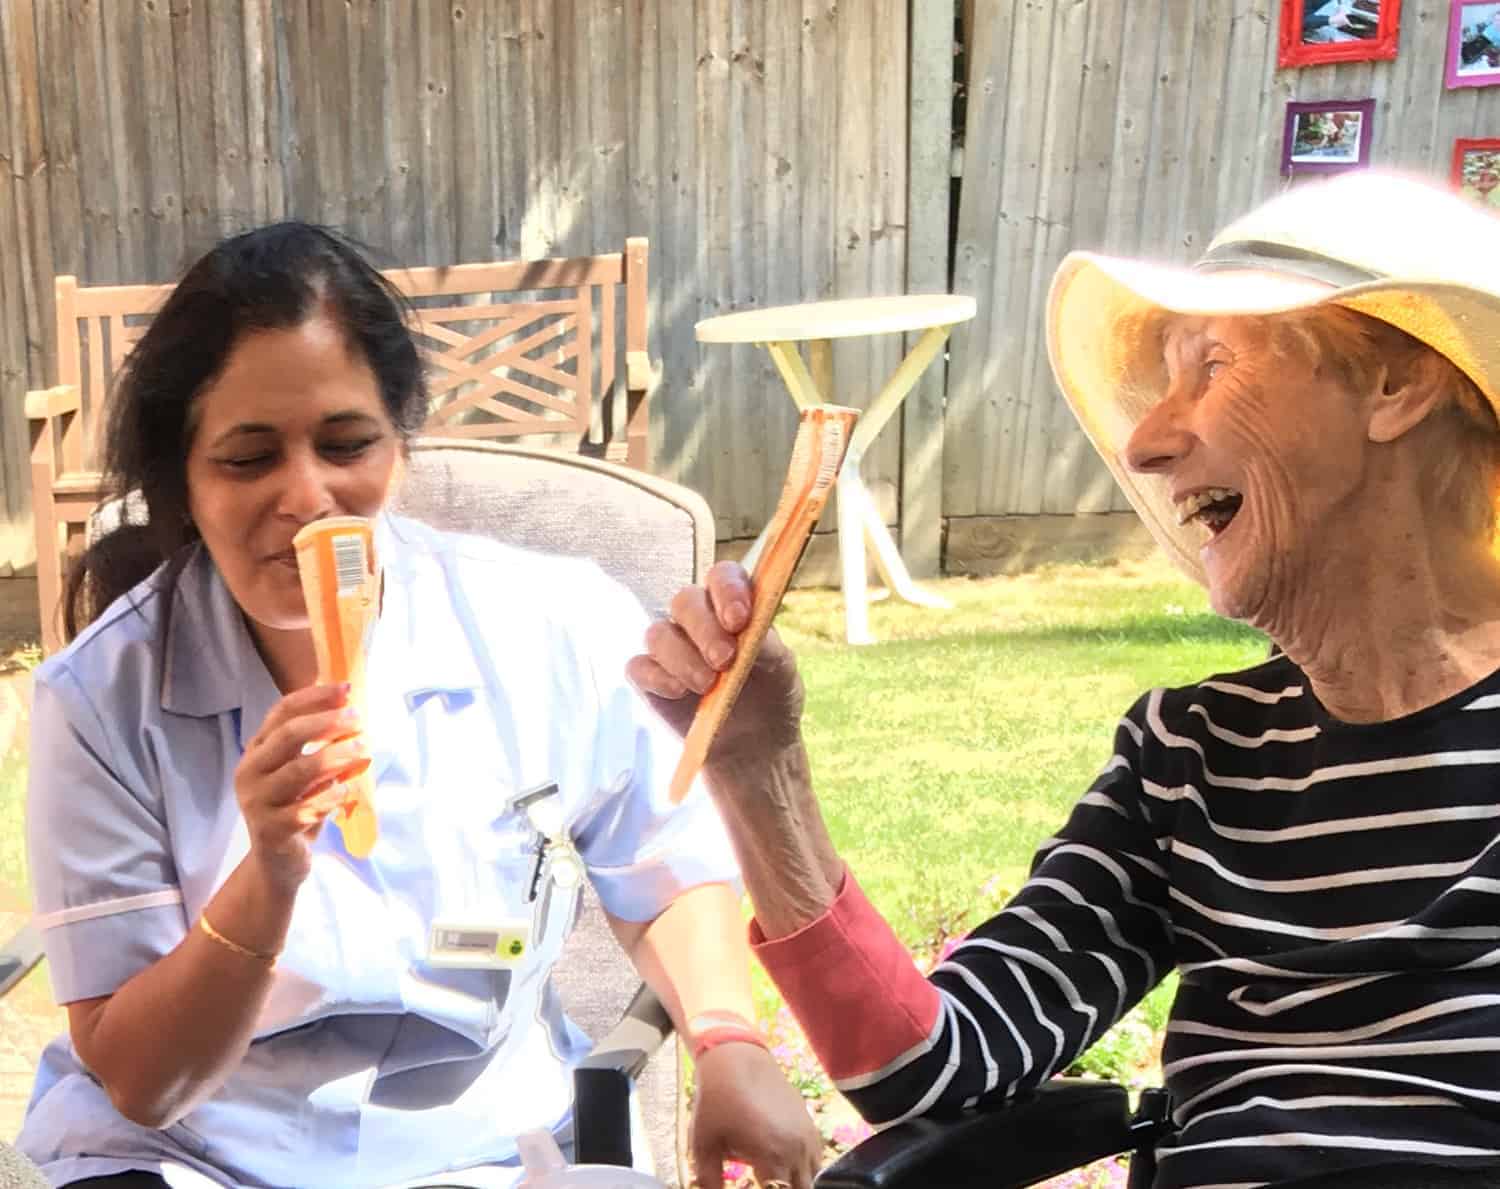 Two people enjoying a sunny day outdoors with joyful expressions, sharing a light-hearted moment over ice cream treats.